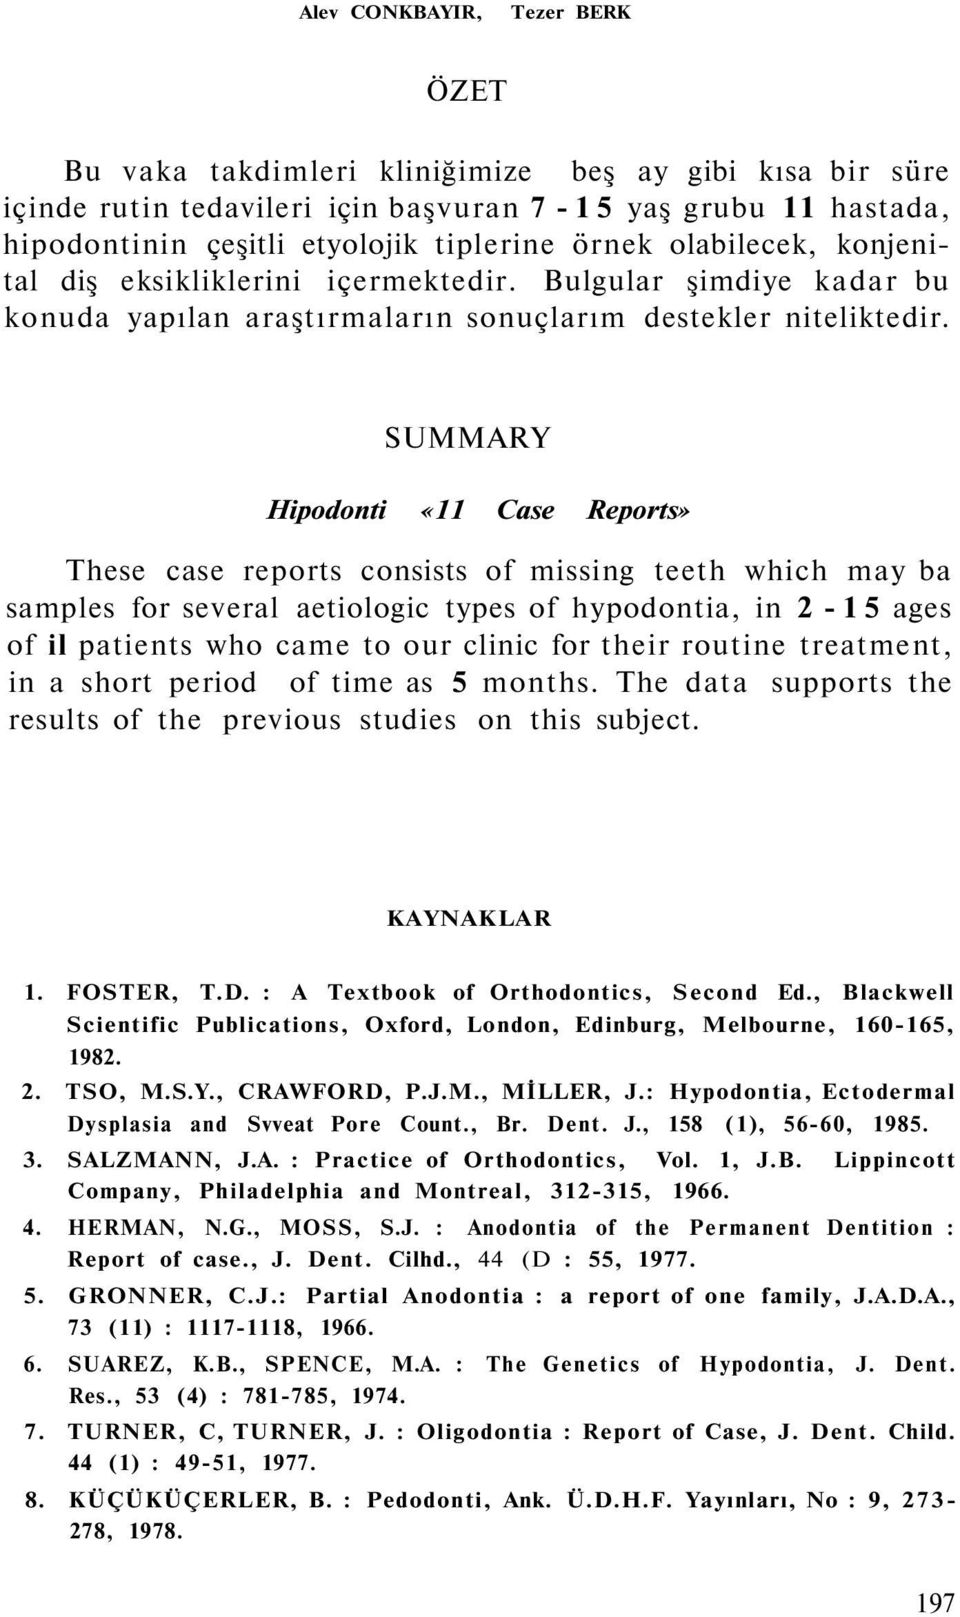 SUMMARY Hipodonti «11 Case Reports» These case reports consists of missing teeth which may ba samples for several aetiologic types of hypodontia, in 2-15 ages of il patients who came to our clinic